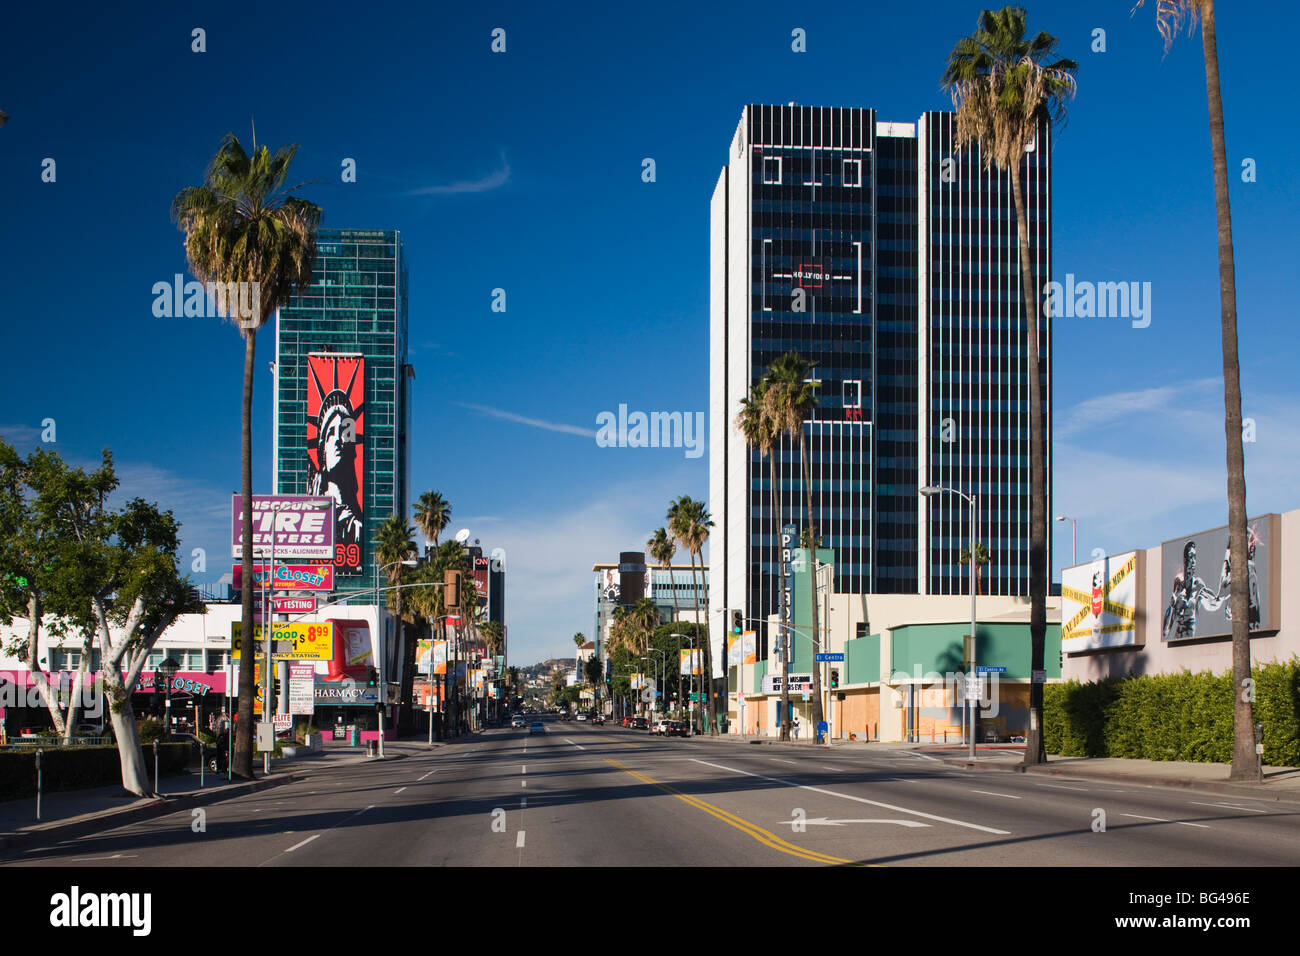 USA, California, Los Angeles, Hollywood, Sunset Boulevard at Gower Street Stock Photo